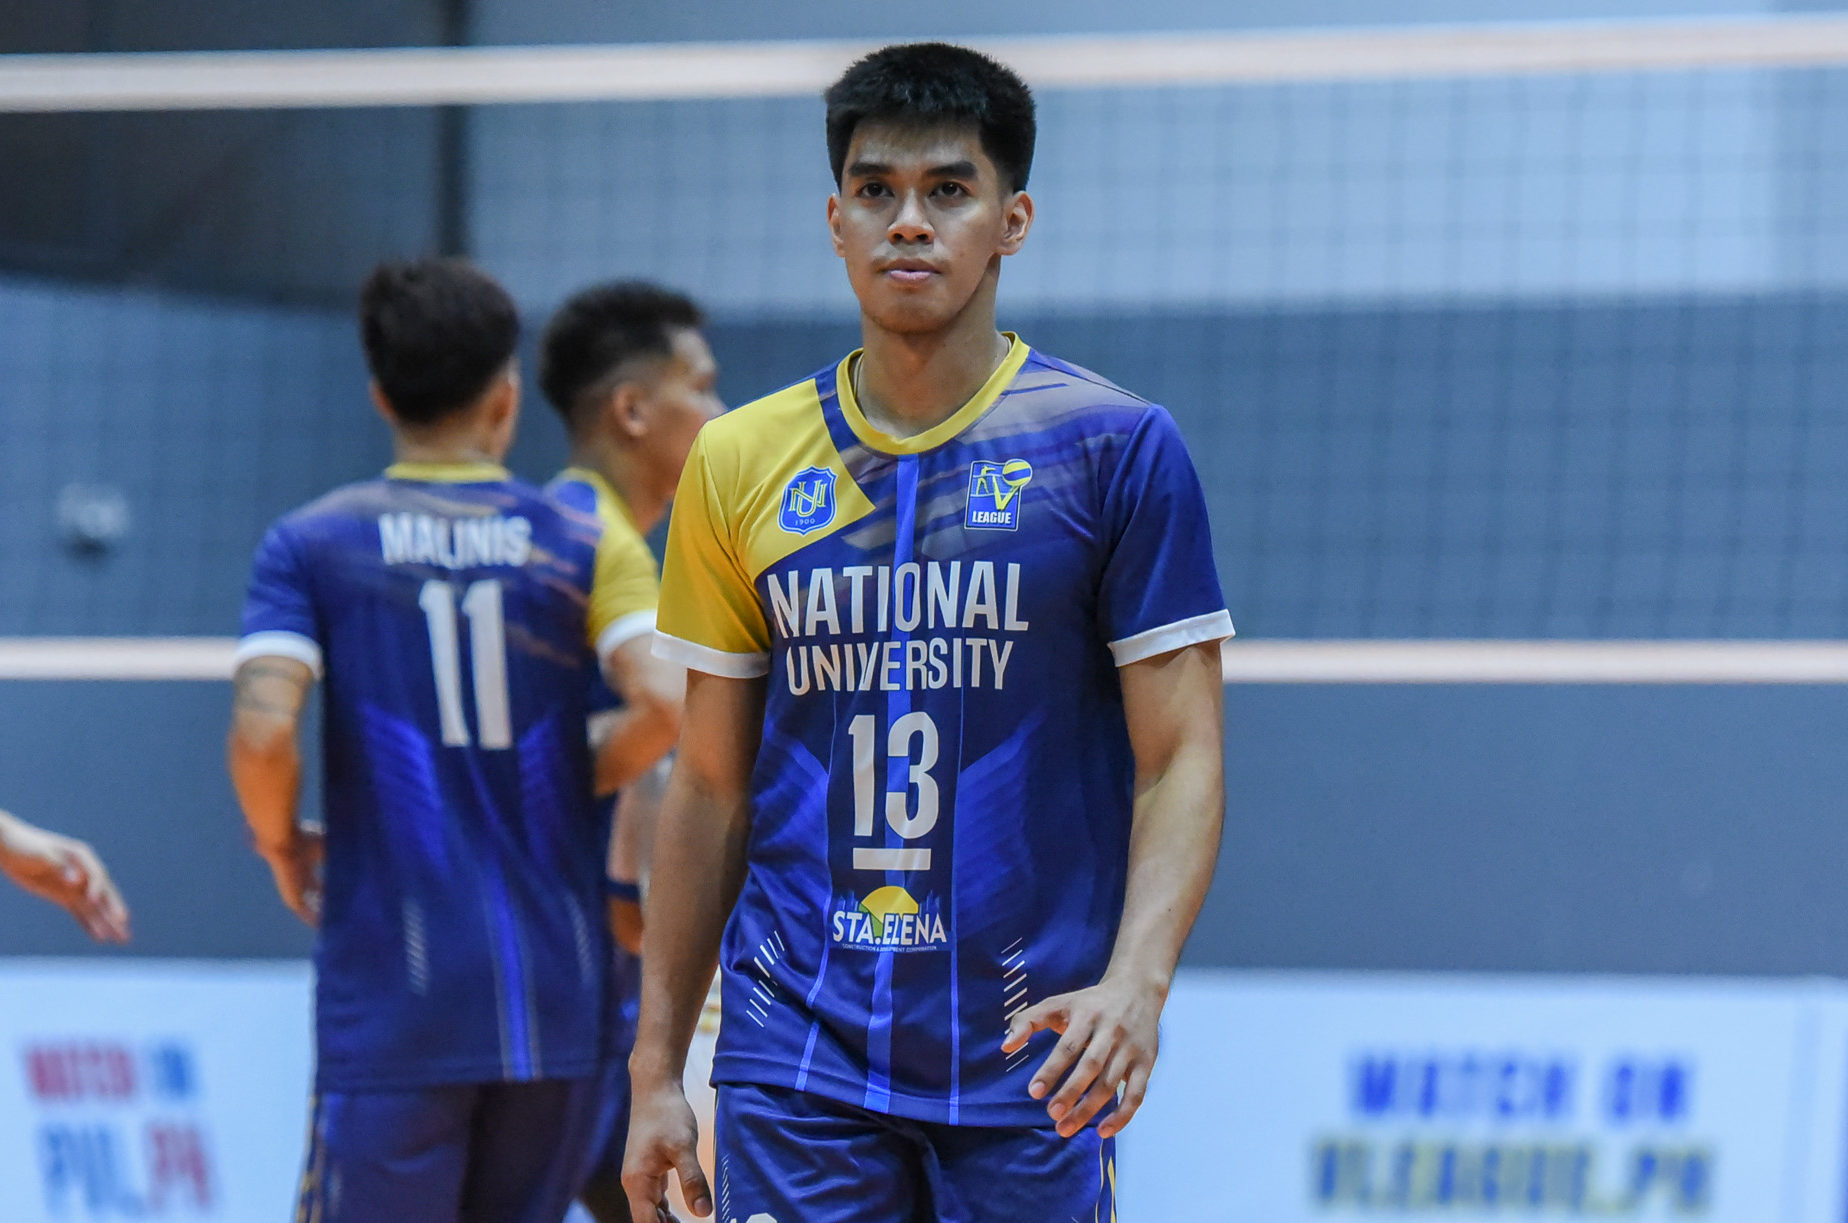 Joshua Retamar skips SEA Games – Claims lack of Support for National Team